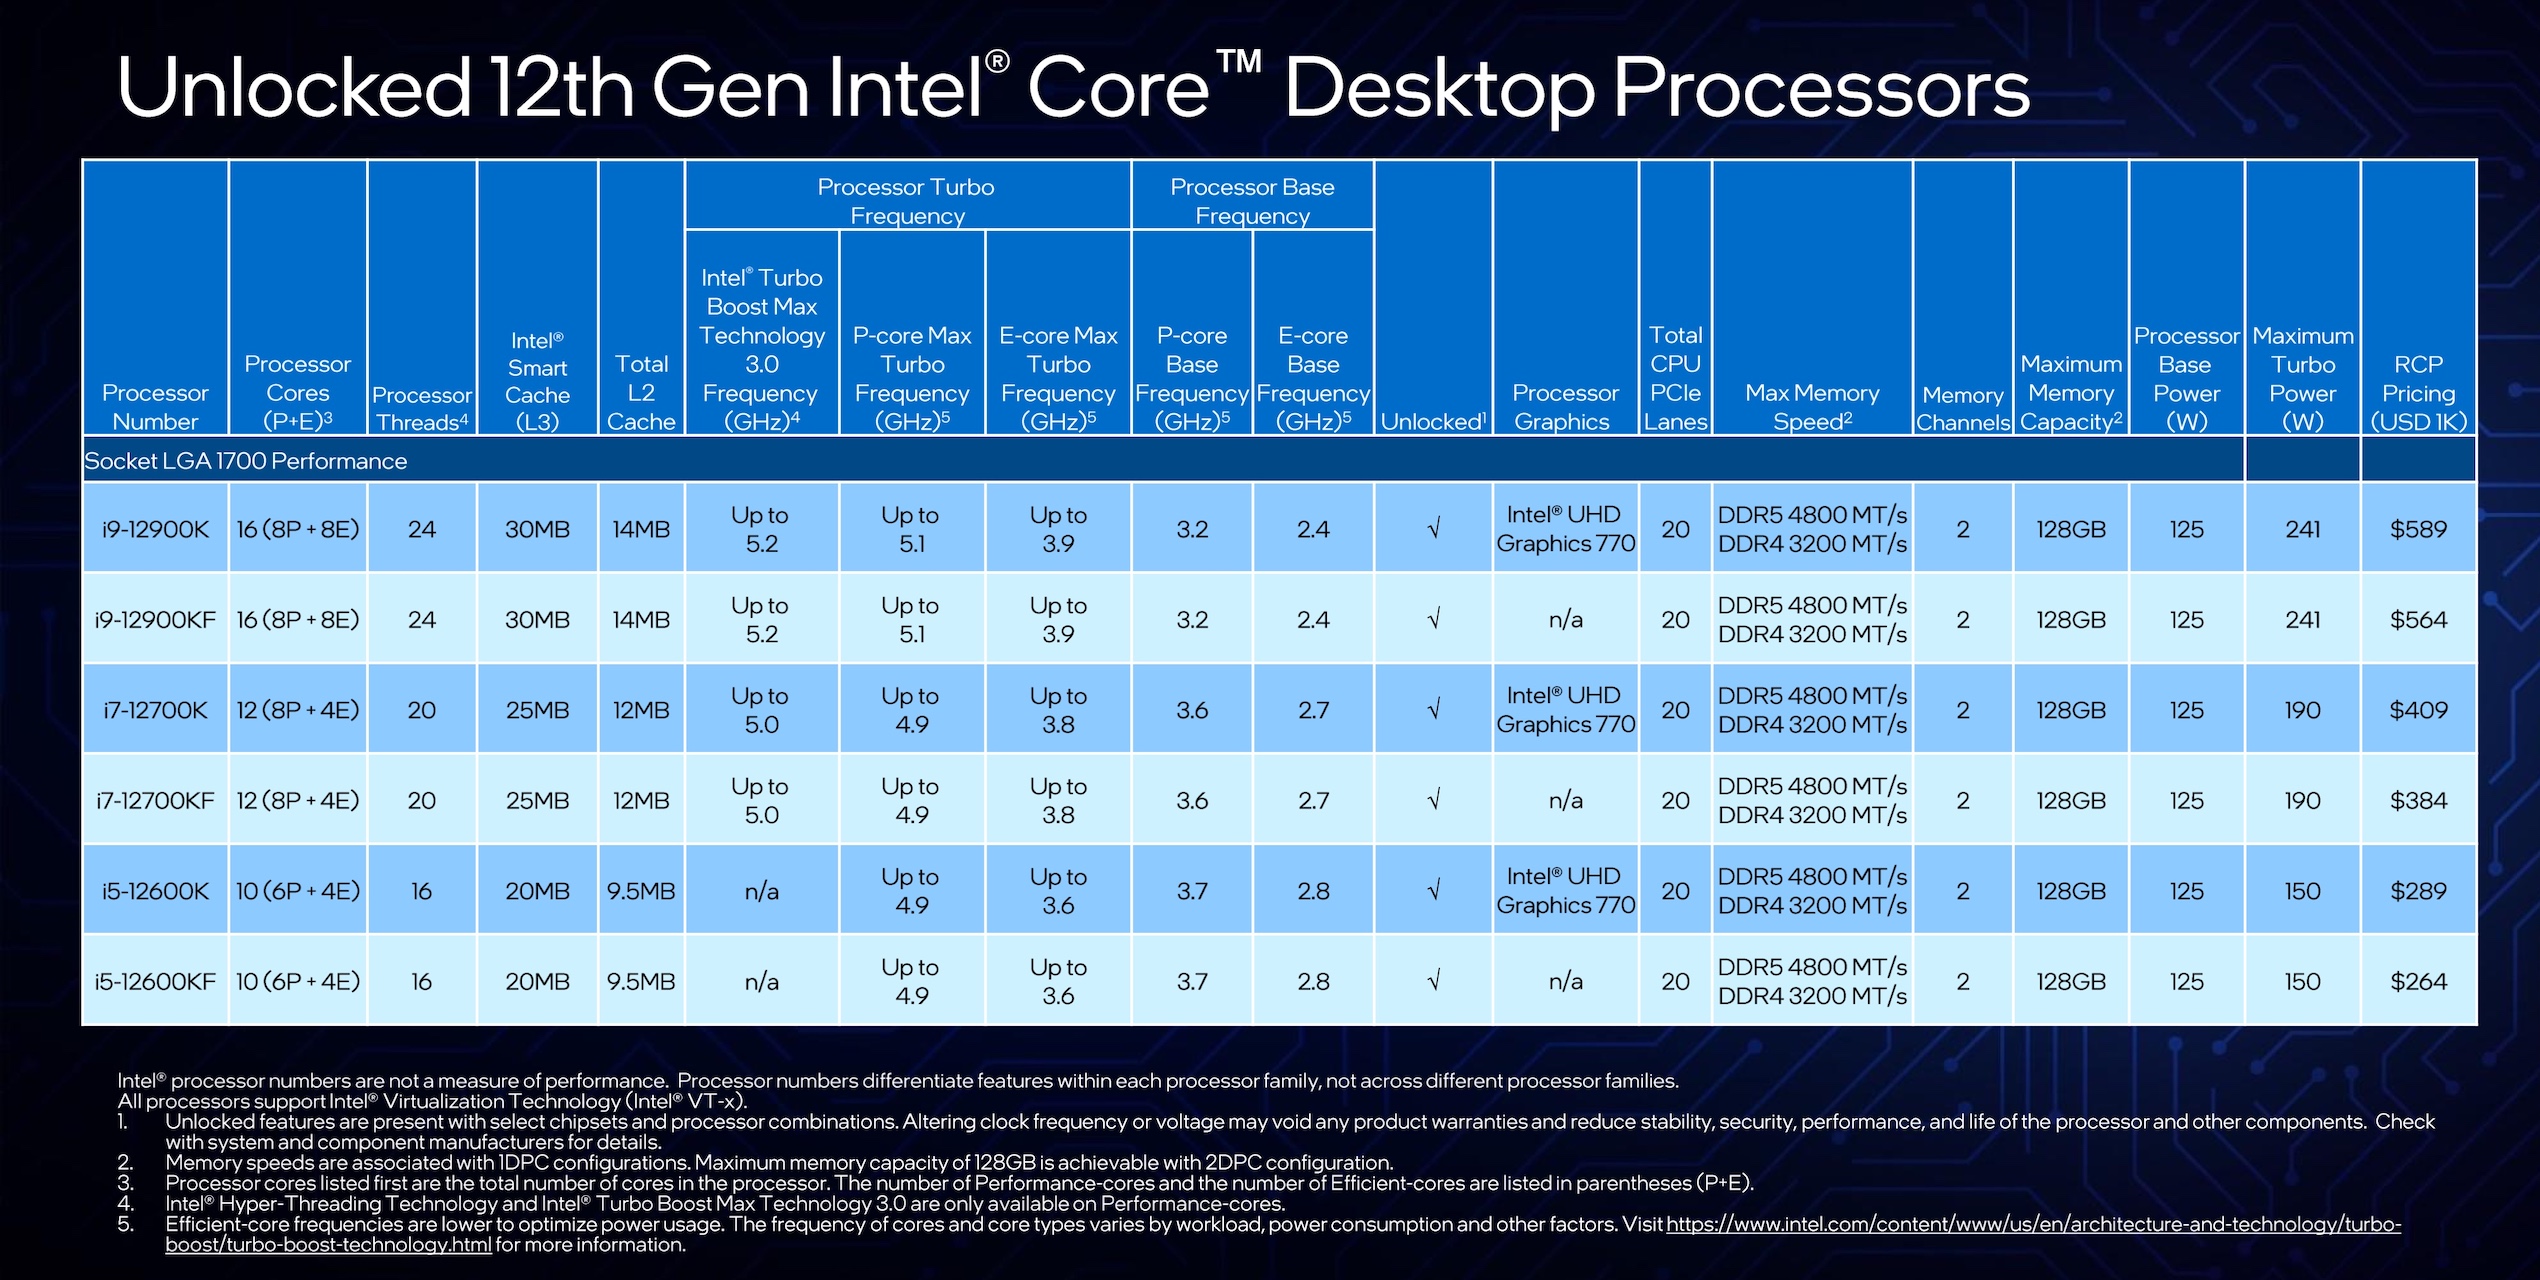 12th-Gen-Desktop-Processors-SKU-Table-with-Pricing-Embargoed-until-Oct.-27-2021-at-9AM-PT.jpeg